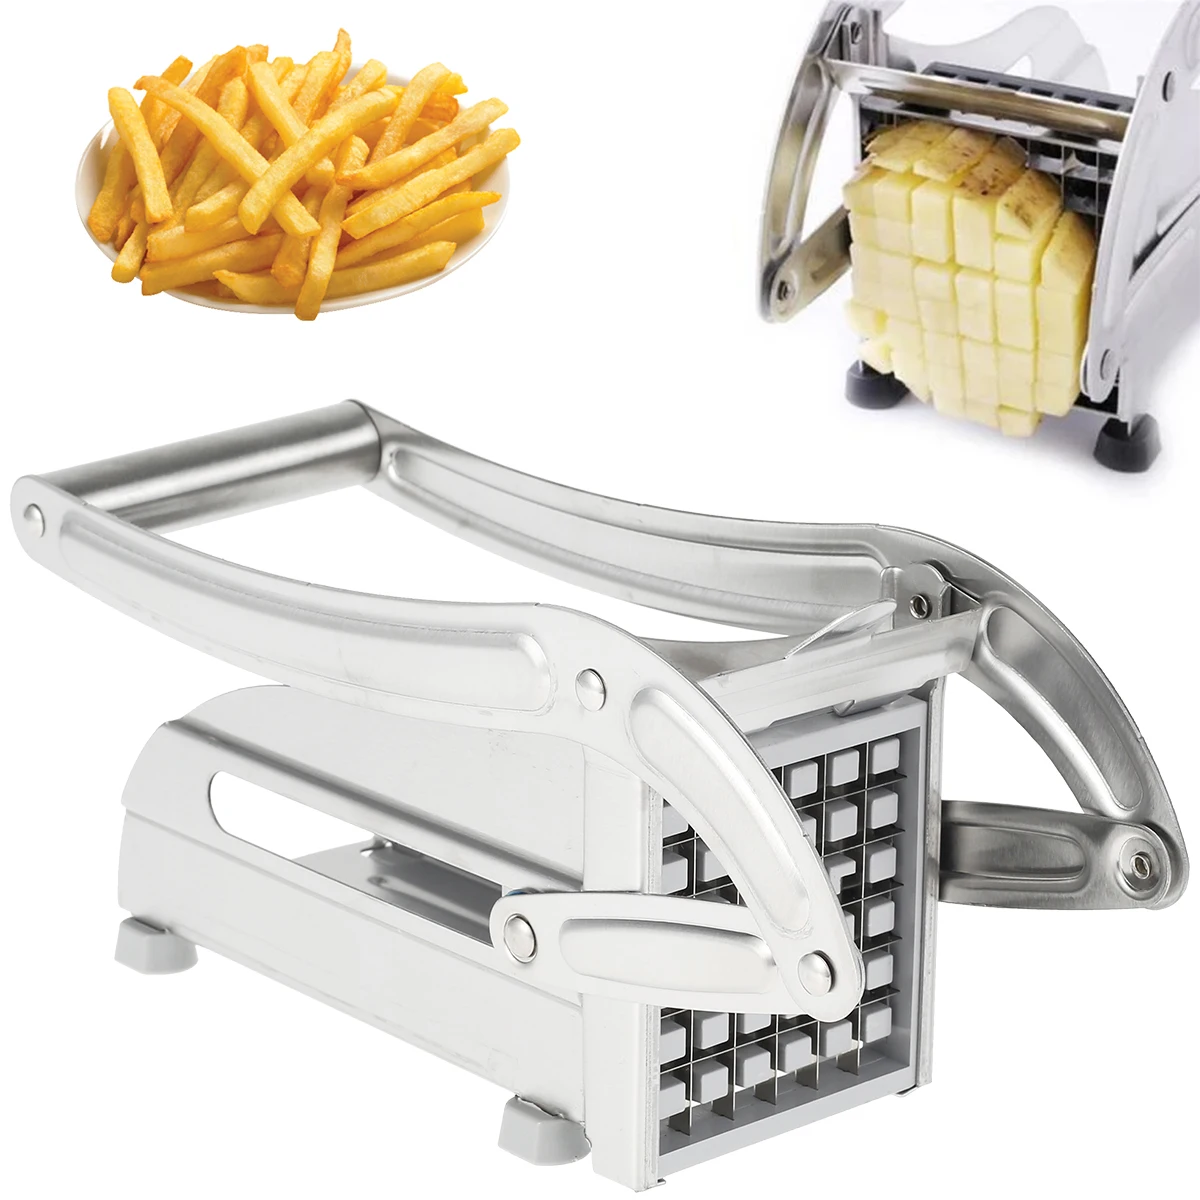 https://ae01.alicdn.com/kf/S74fbf35119e44daf87462108bc7b633fV/French-Fry-Cutter-Multifunction-Vegetable-Fruit-Chopper-with-2-Stainless-Steel-Blades-for-French-Fries-Chips.jpg